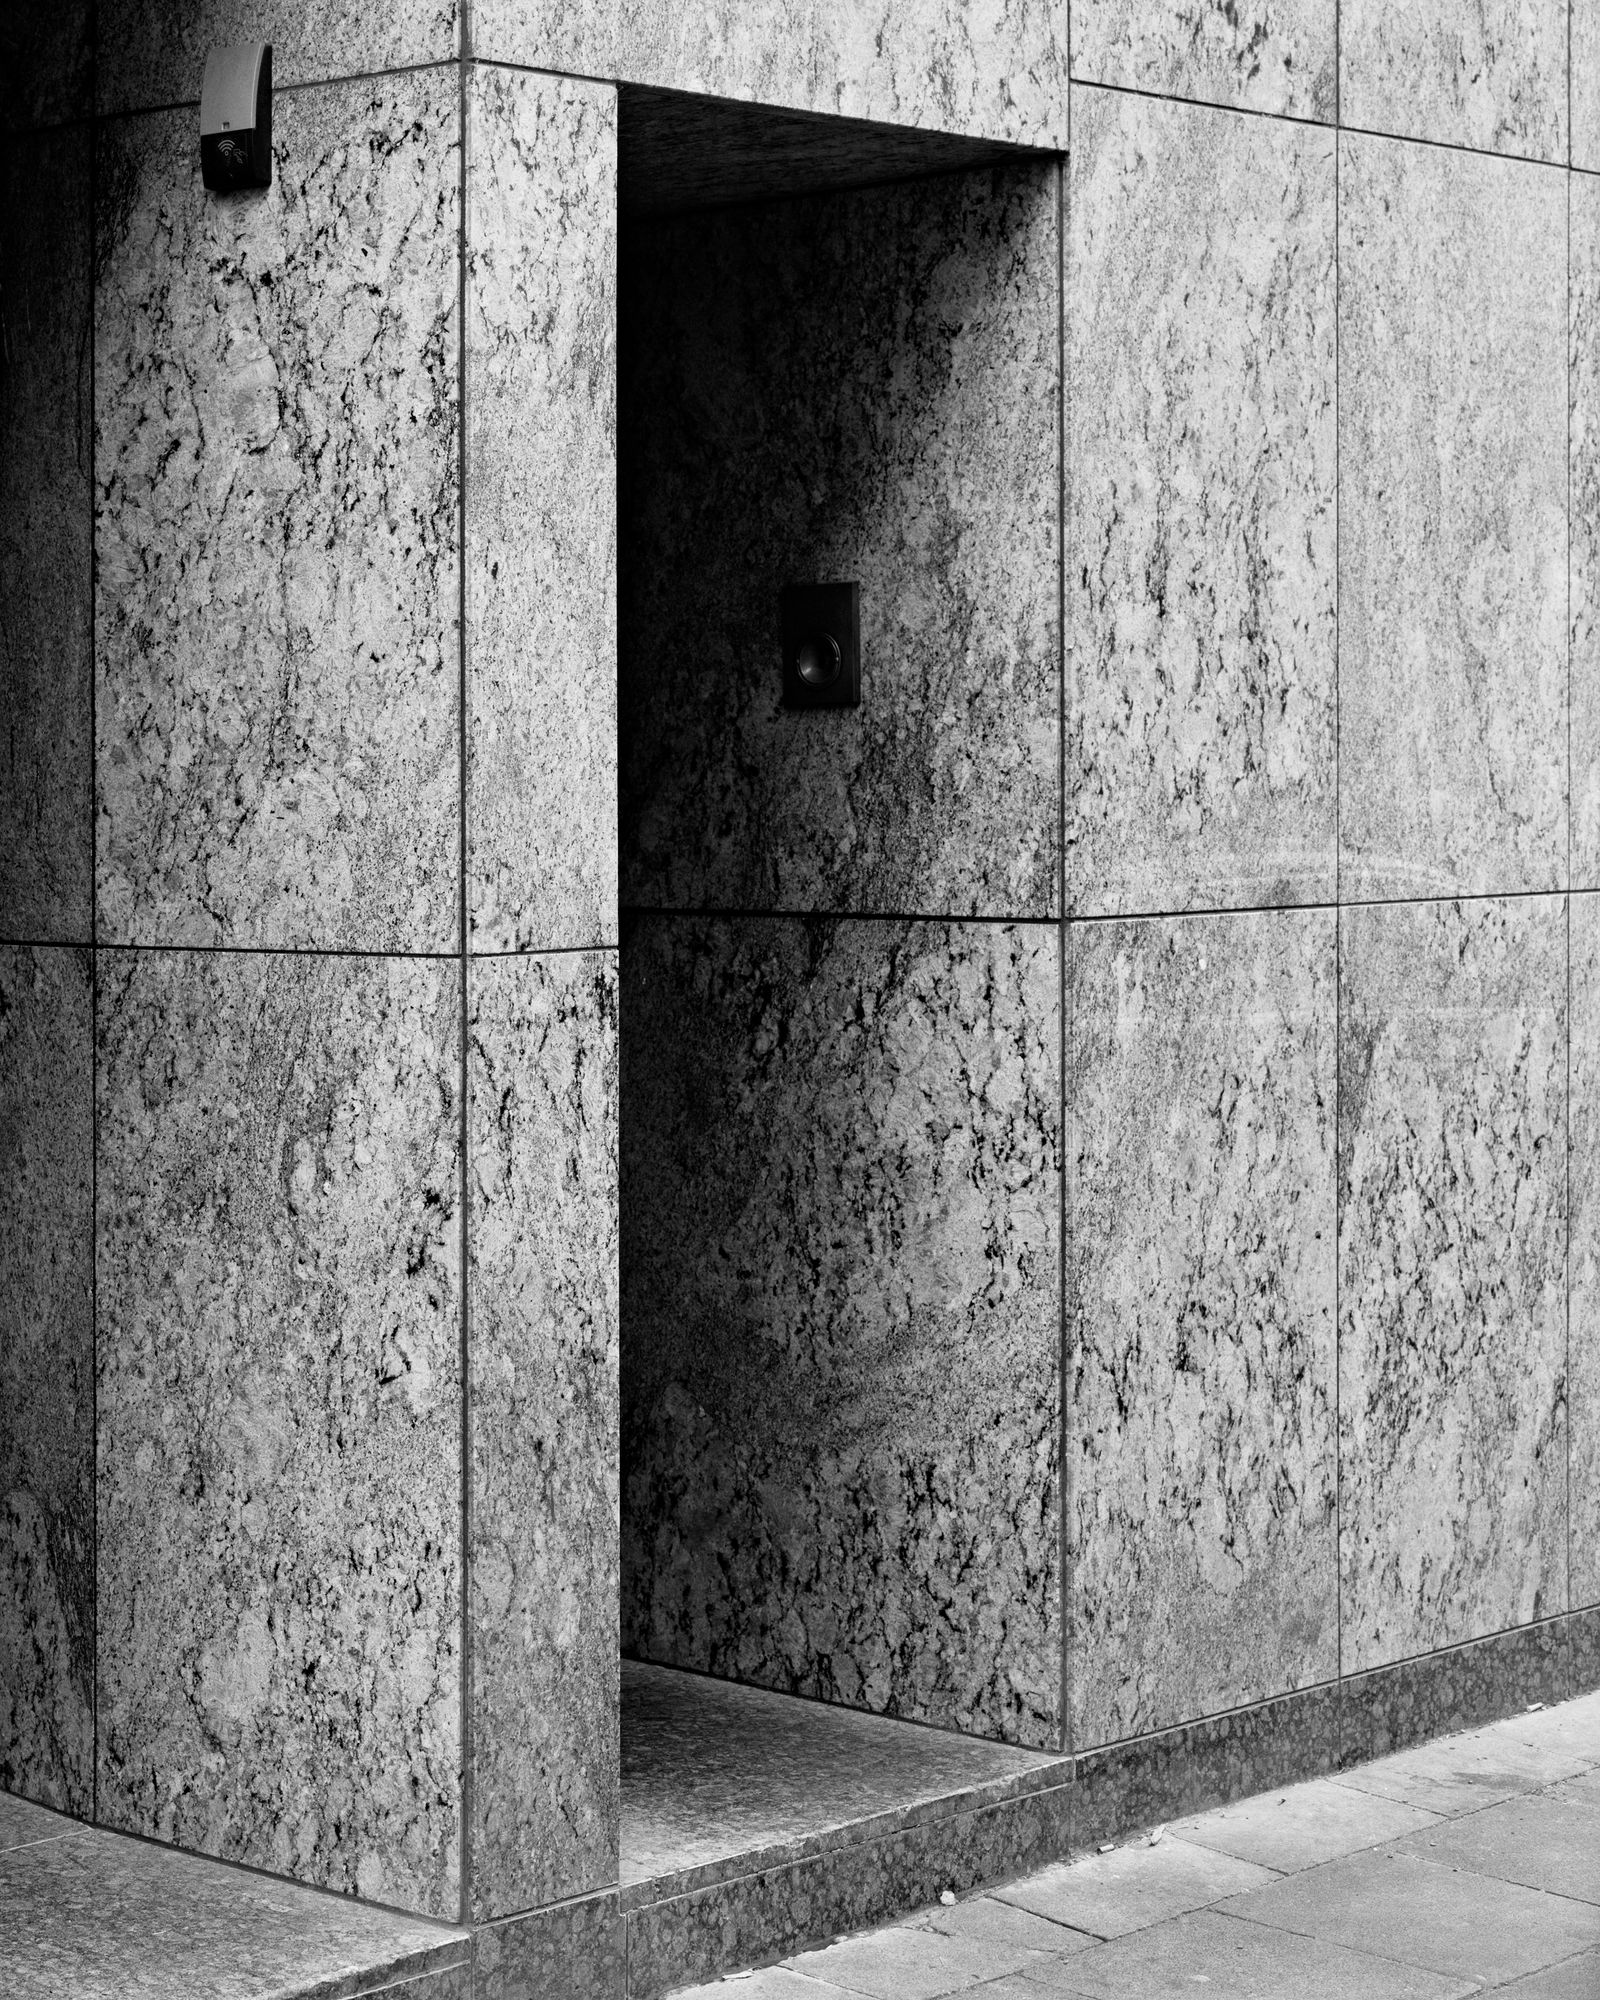 © Bertrand Cavalier, from the series Concrete Doesn't Burn